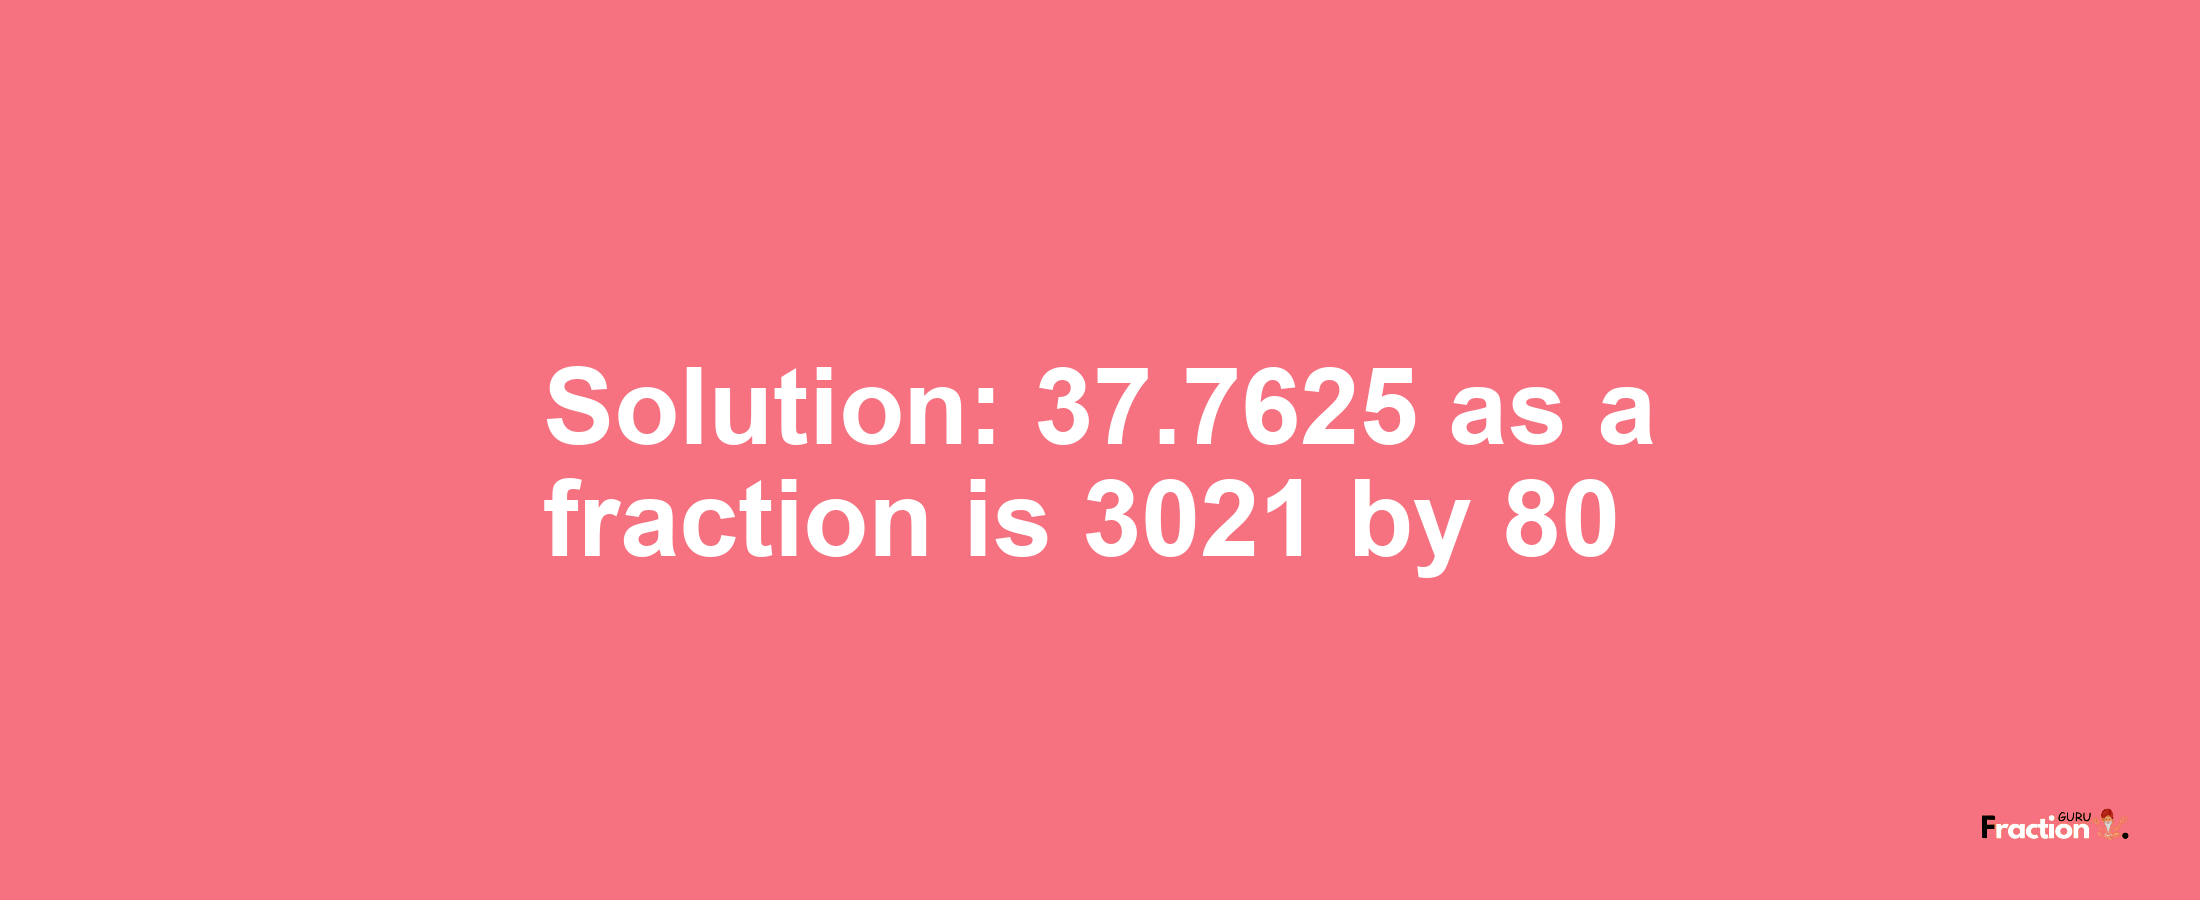 Solution:37.7625 as a fraction is 3021/80